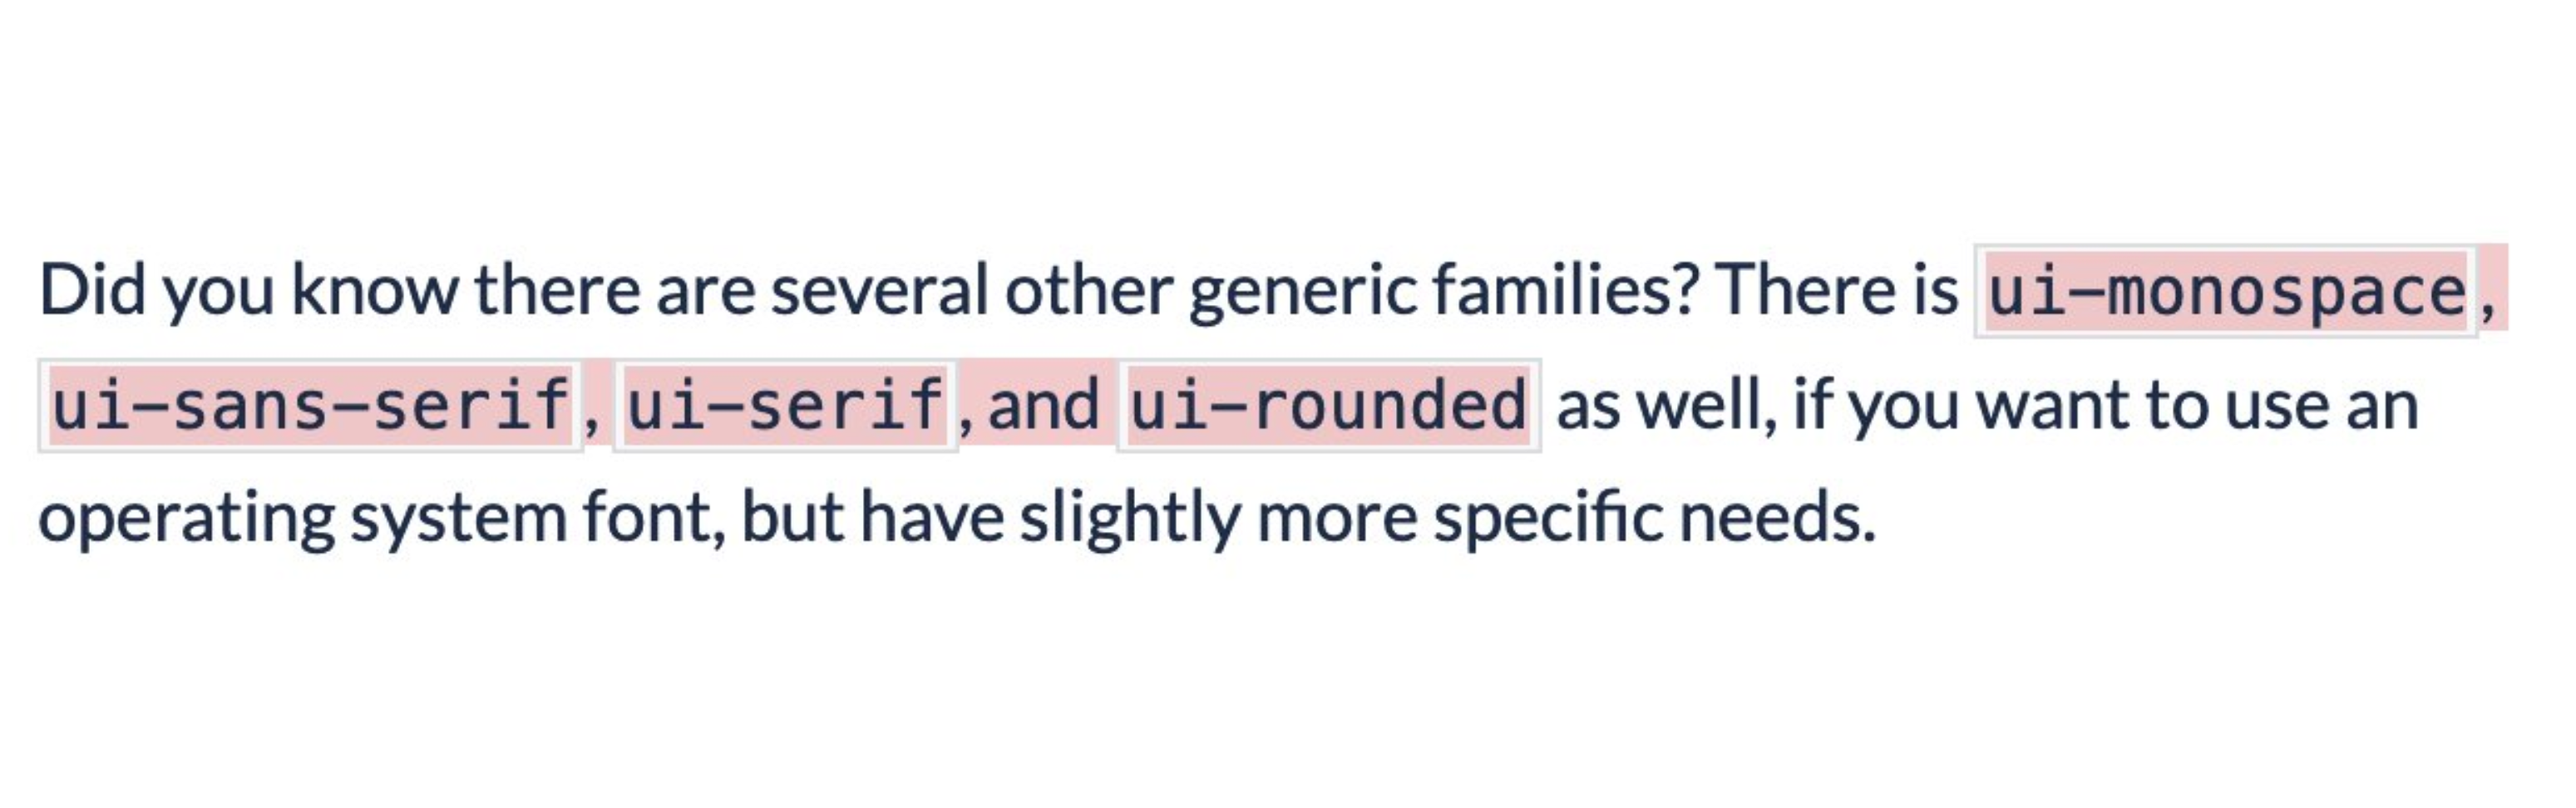 Did you know there are several other generic families. There is ui-monospace, ui-sans-serif, ui-serif, and ui-rounded as well, if you want to use an operating system font, but have slightly more specific needs.